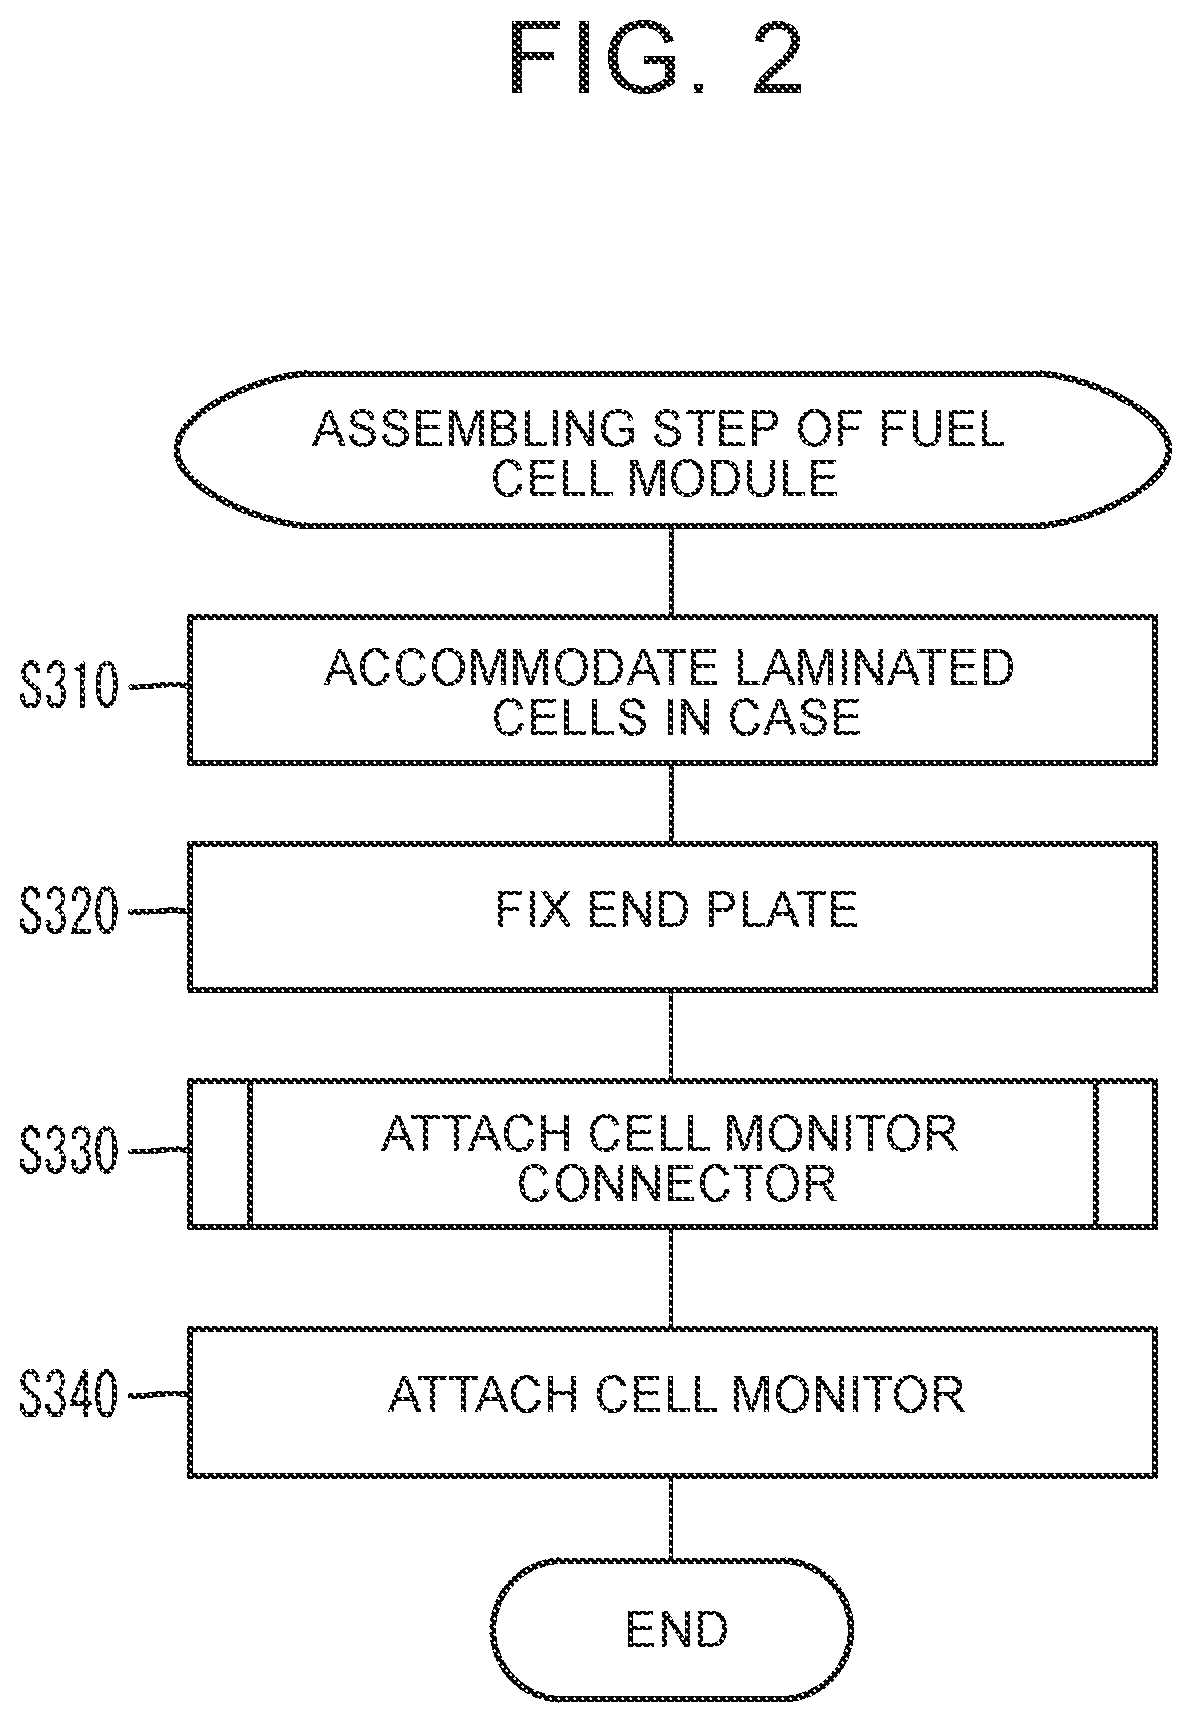 Method of manufacturing a fuel cell module